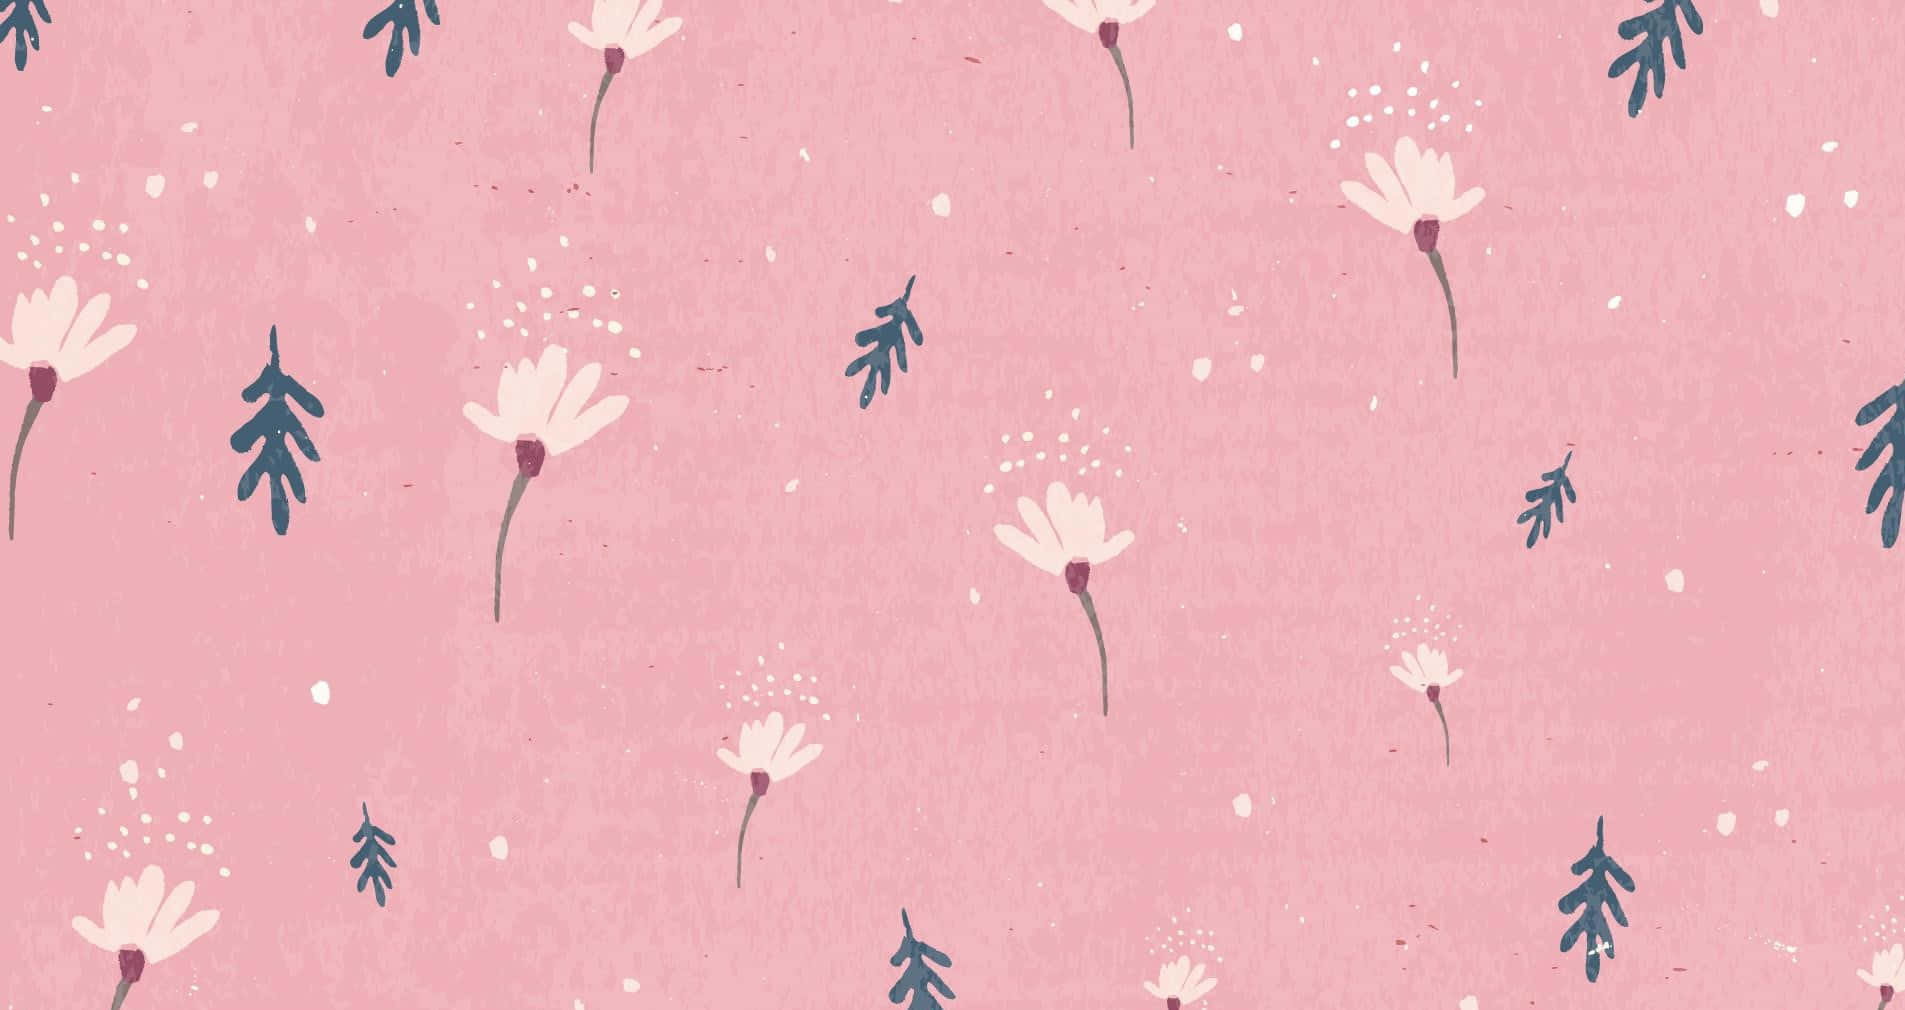 Get work done and look stylish with this girly laptop Wallpaper